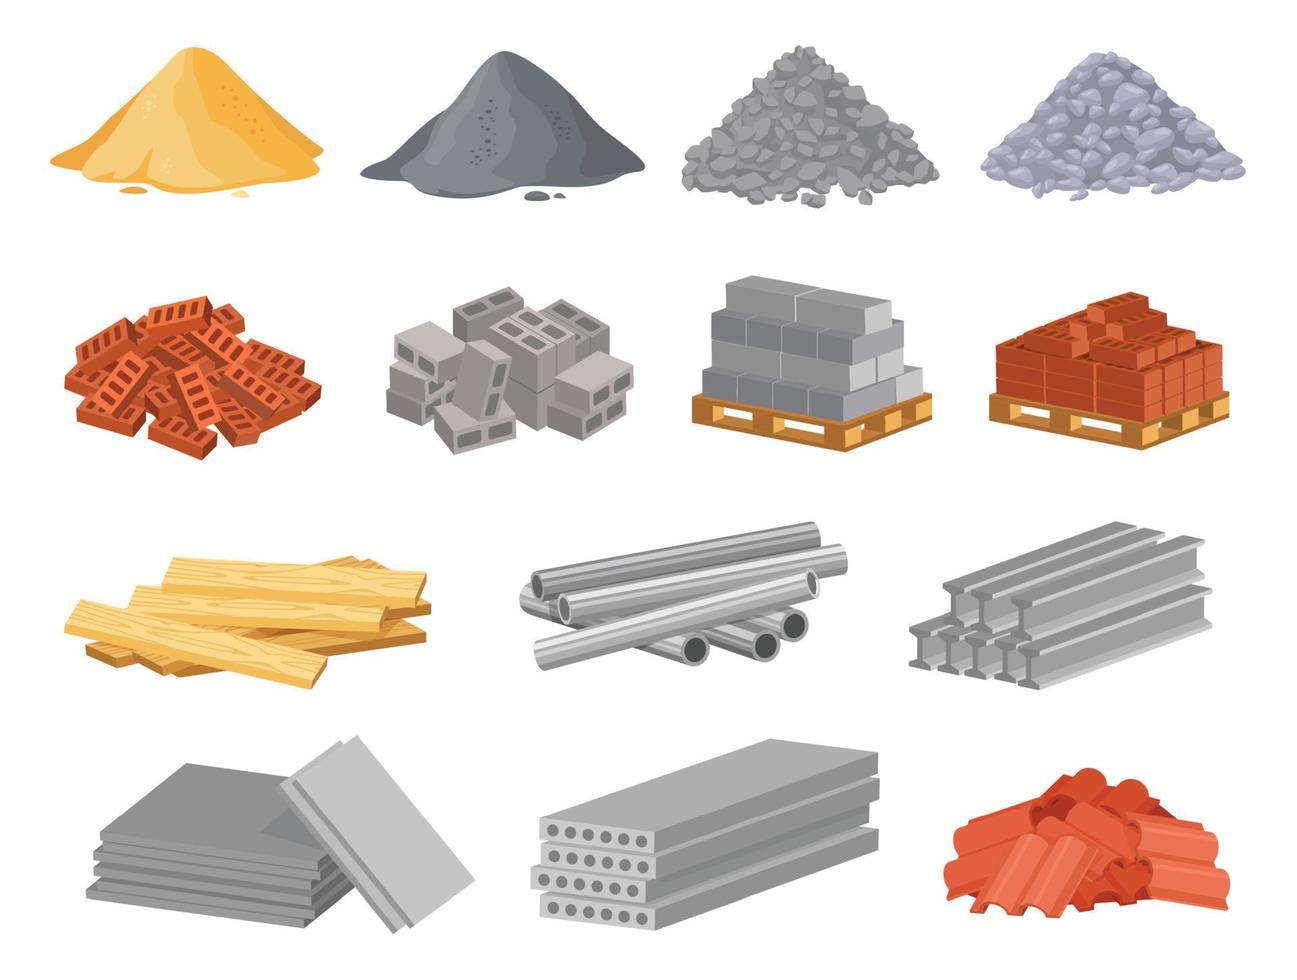 Cartoon construction building materials, sand and gravel pile. Brick stacks, metal pipes, cement. Building supplies for renovation vector set